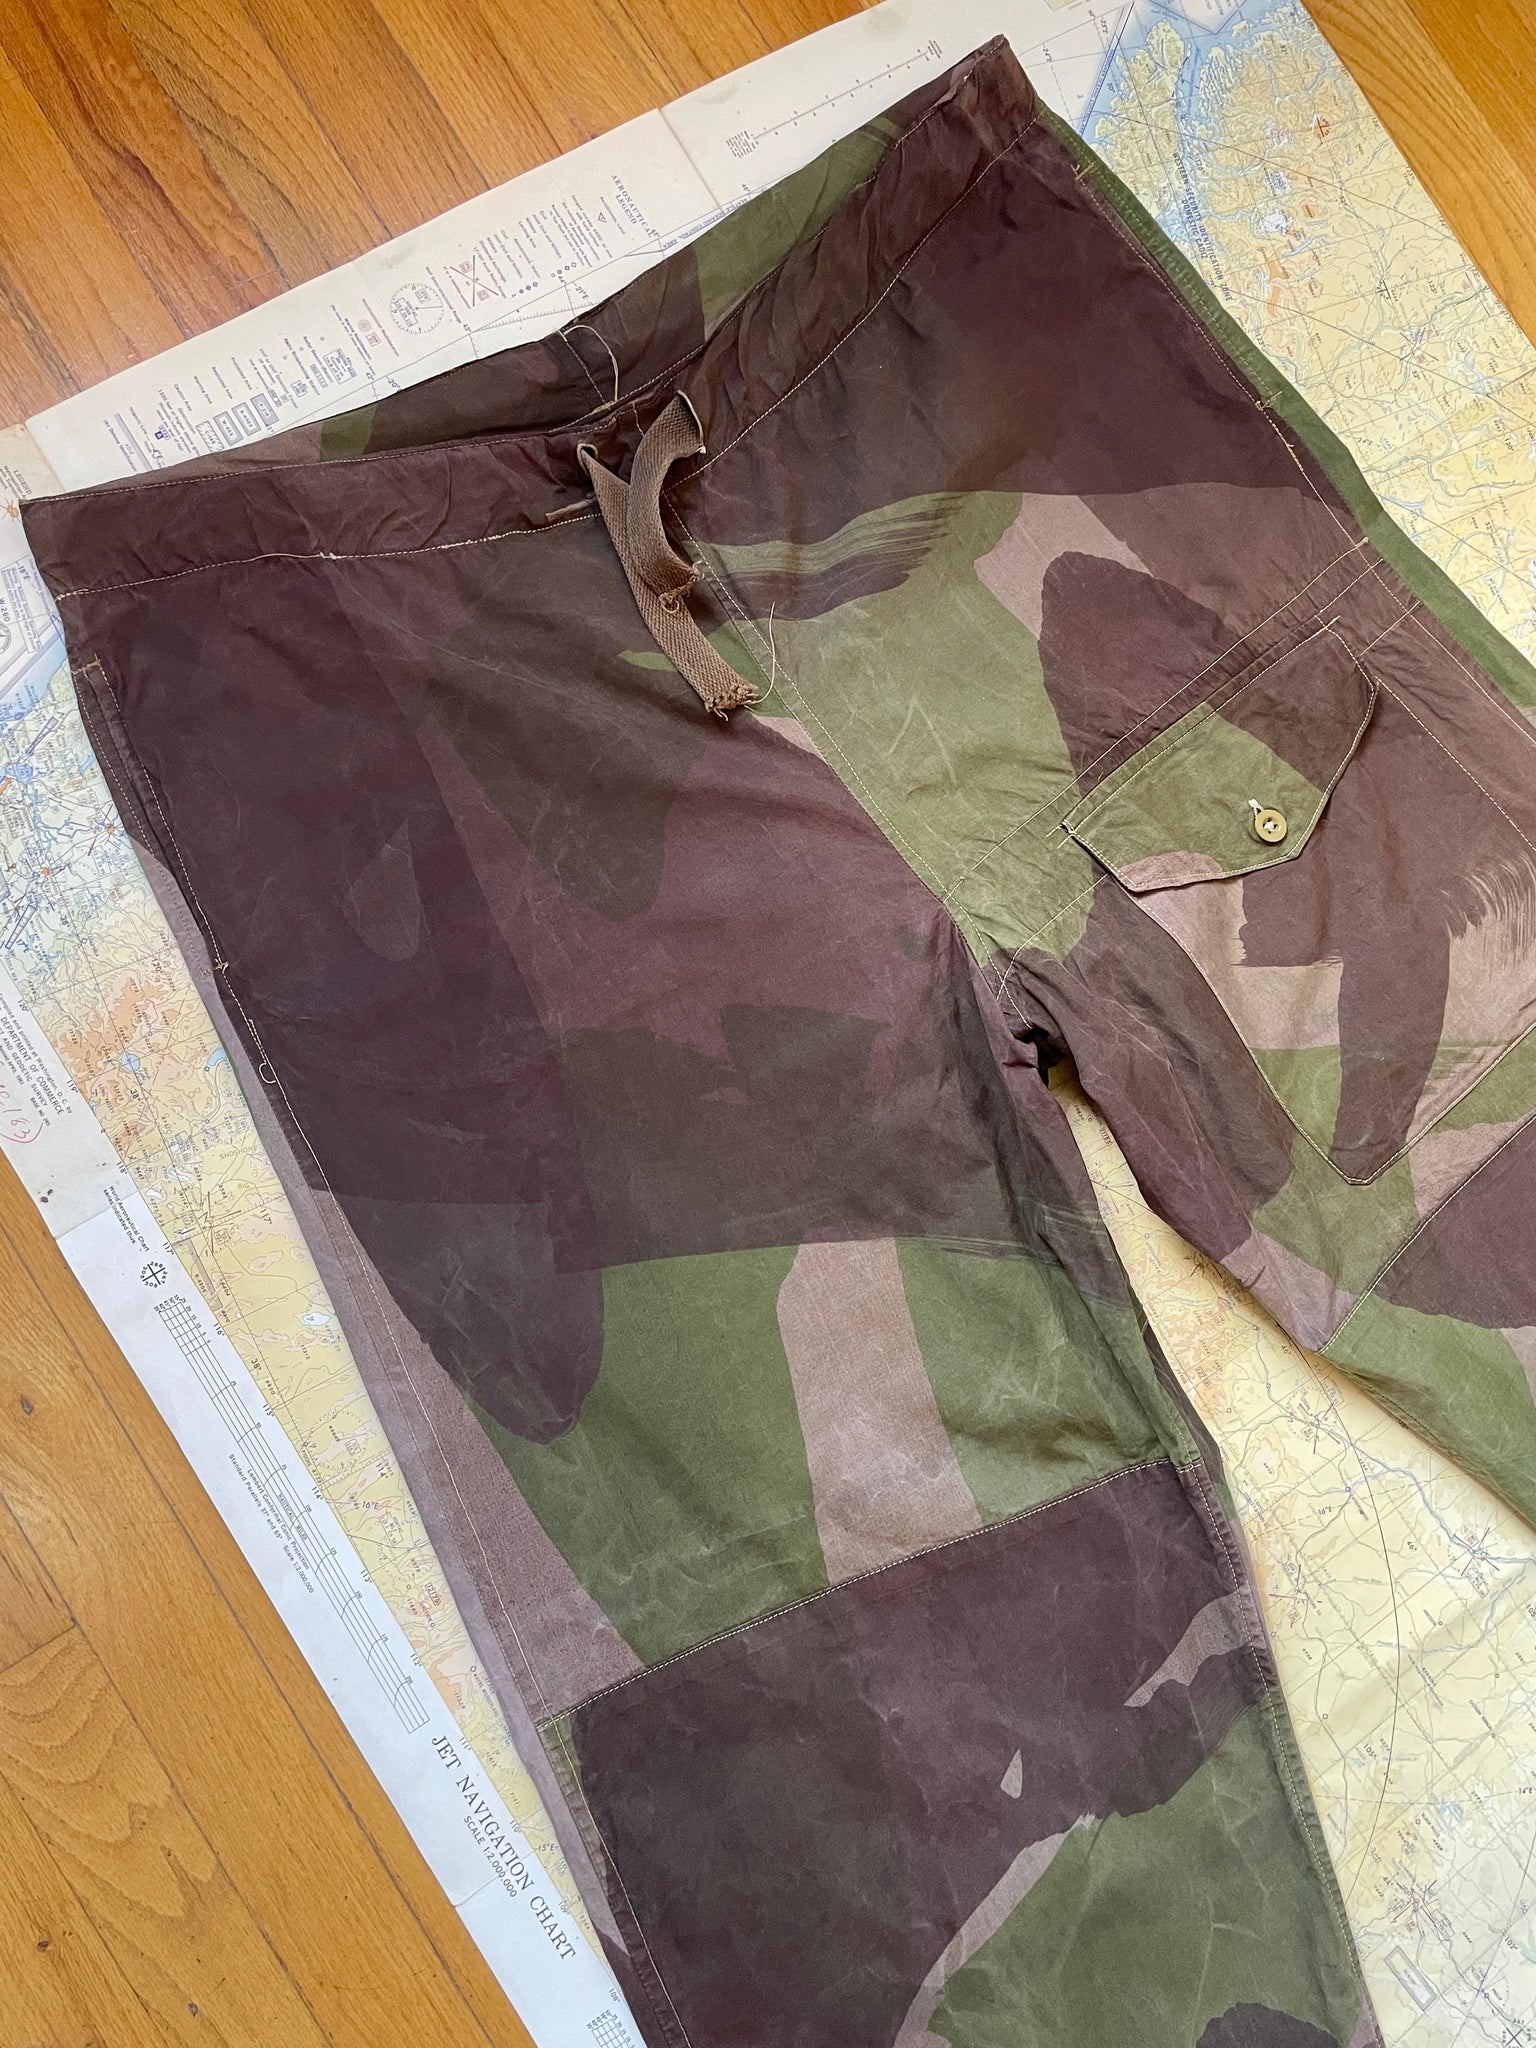 British Army Surplus Genuine British Army Surplus Grade 1 MTP Windproof  Trousers  Army Clothing from Army and Navy Ltd Army And Navy Stores UK